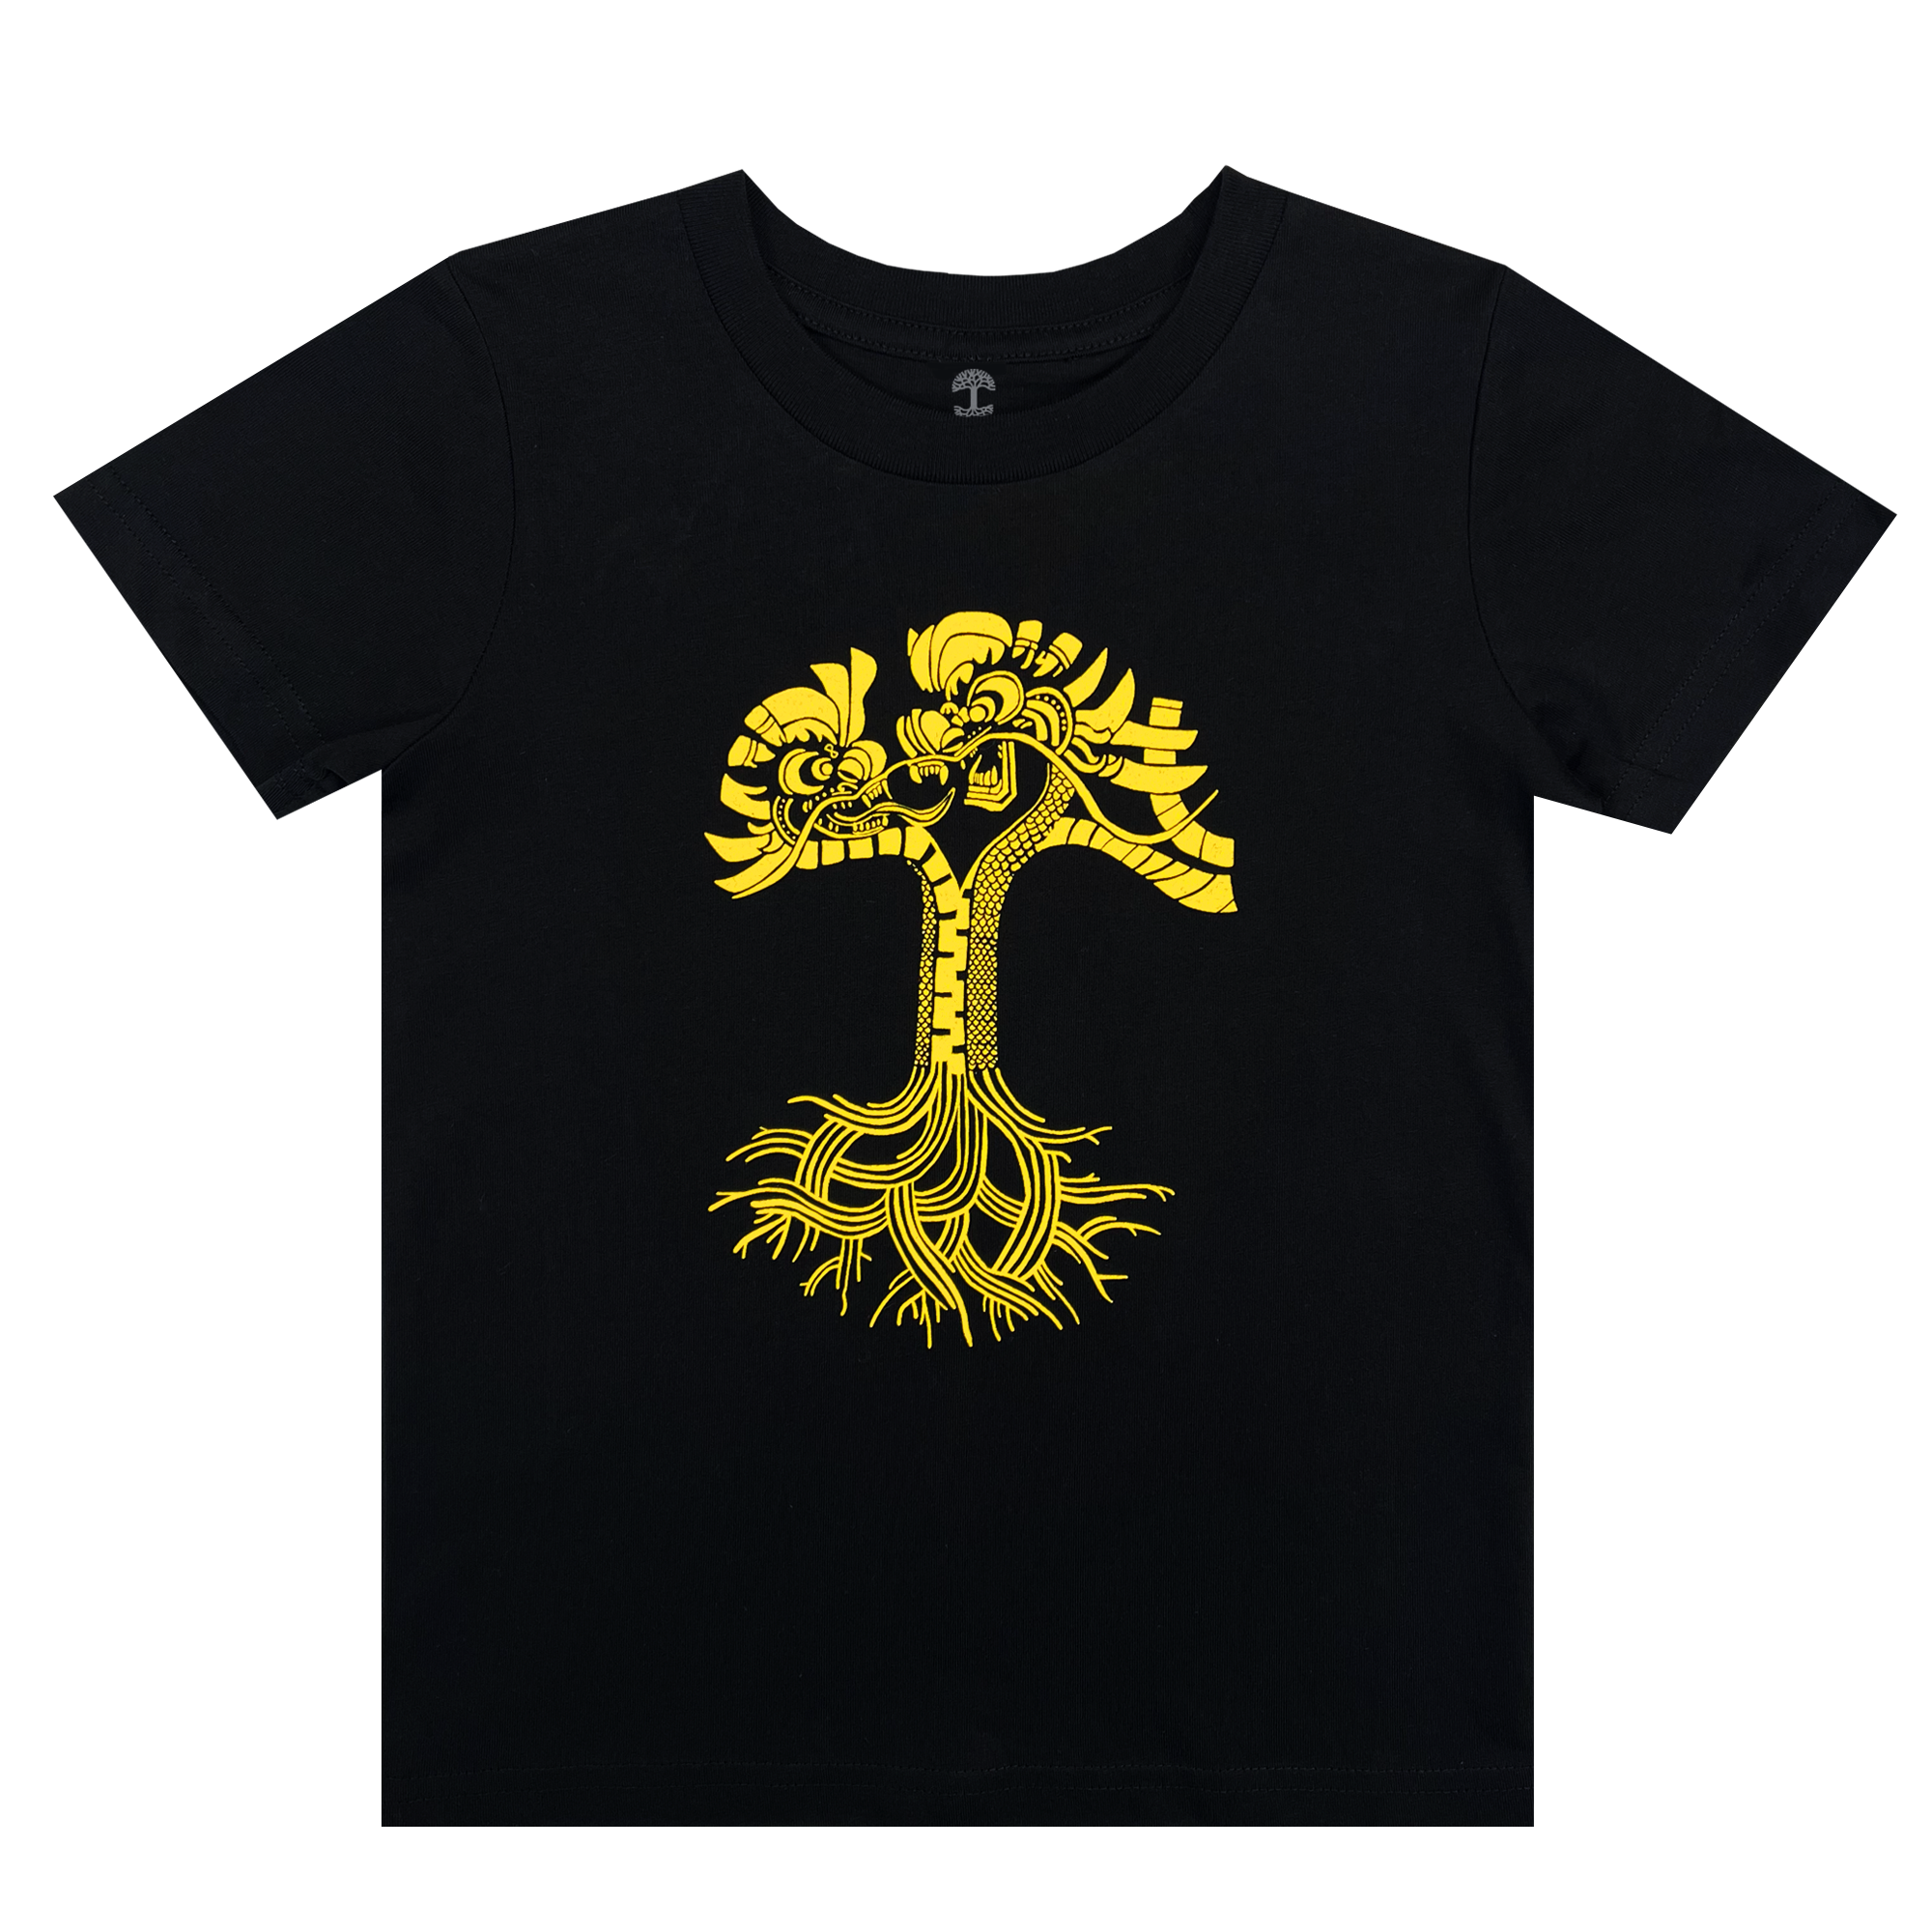 Black toddler-sized t-shirt with gold dragon power design shaped like an Oaklandish tree logo.